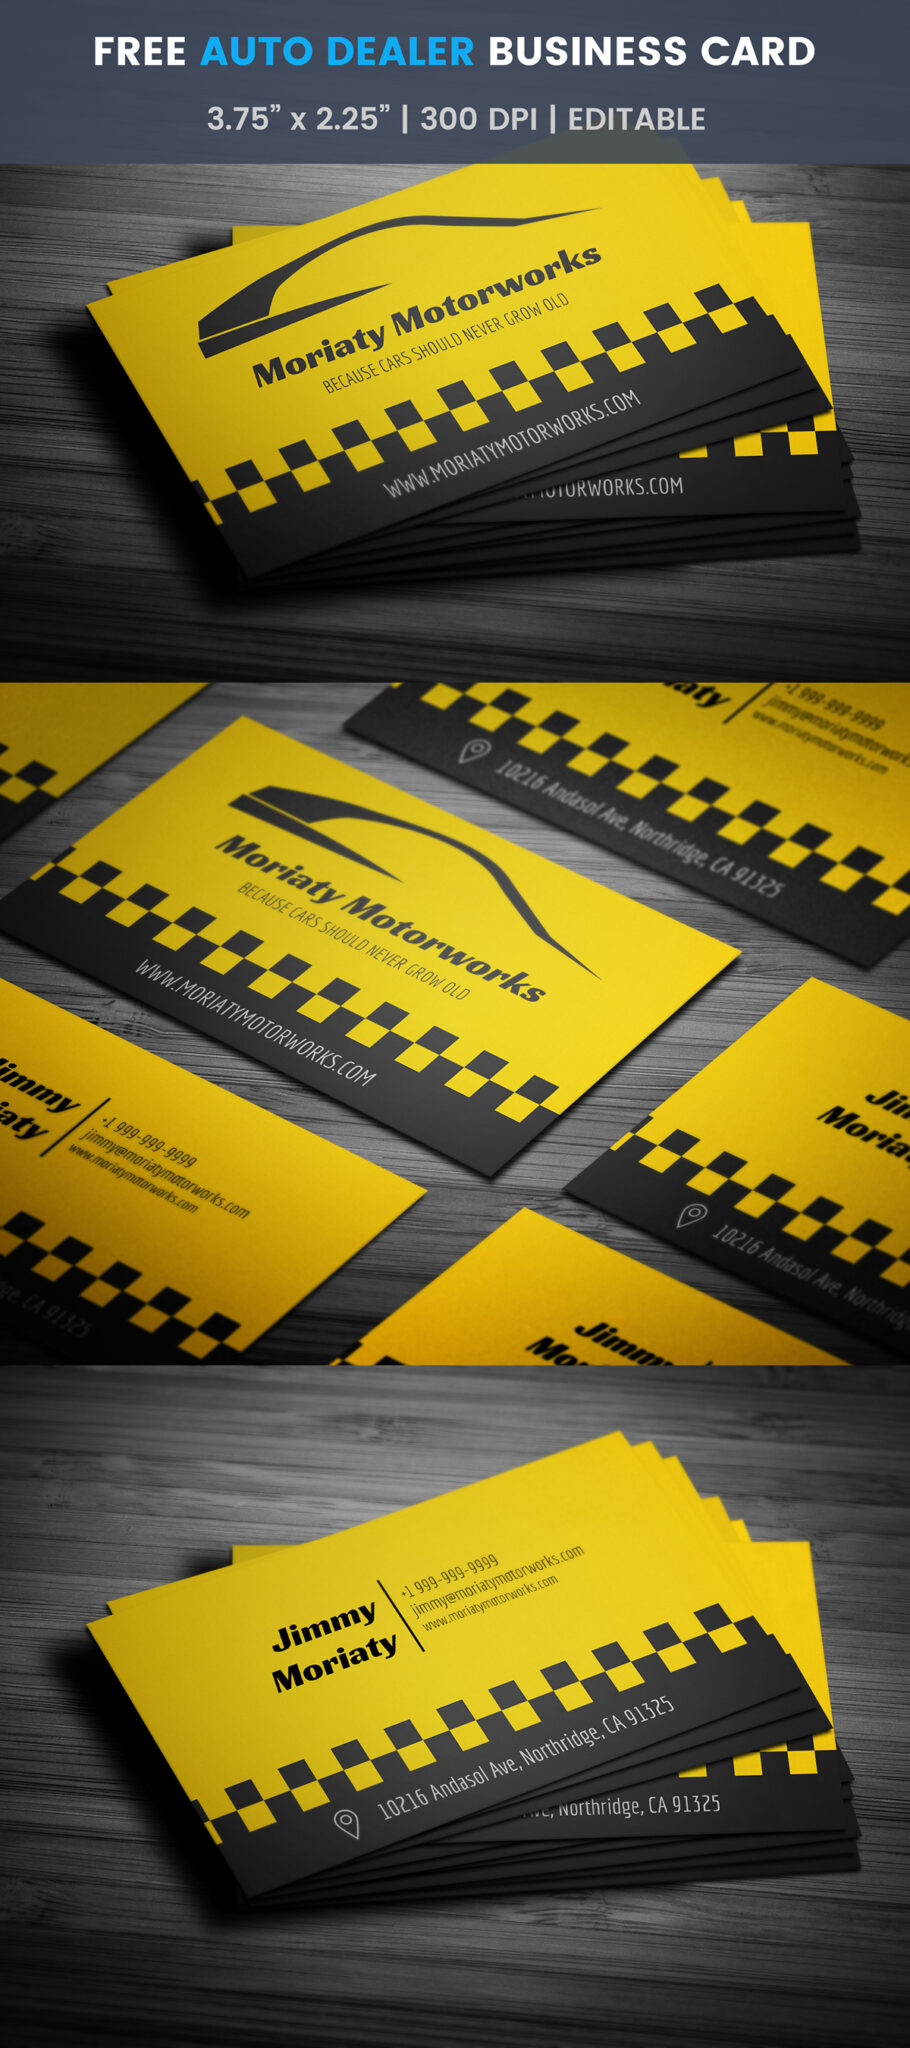 free-automotive-business-card-template-on-student-show-pertaining-to